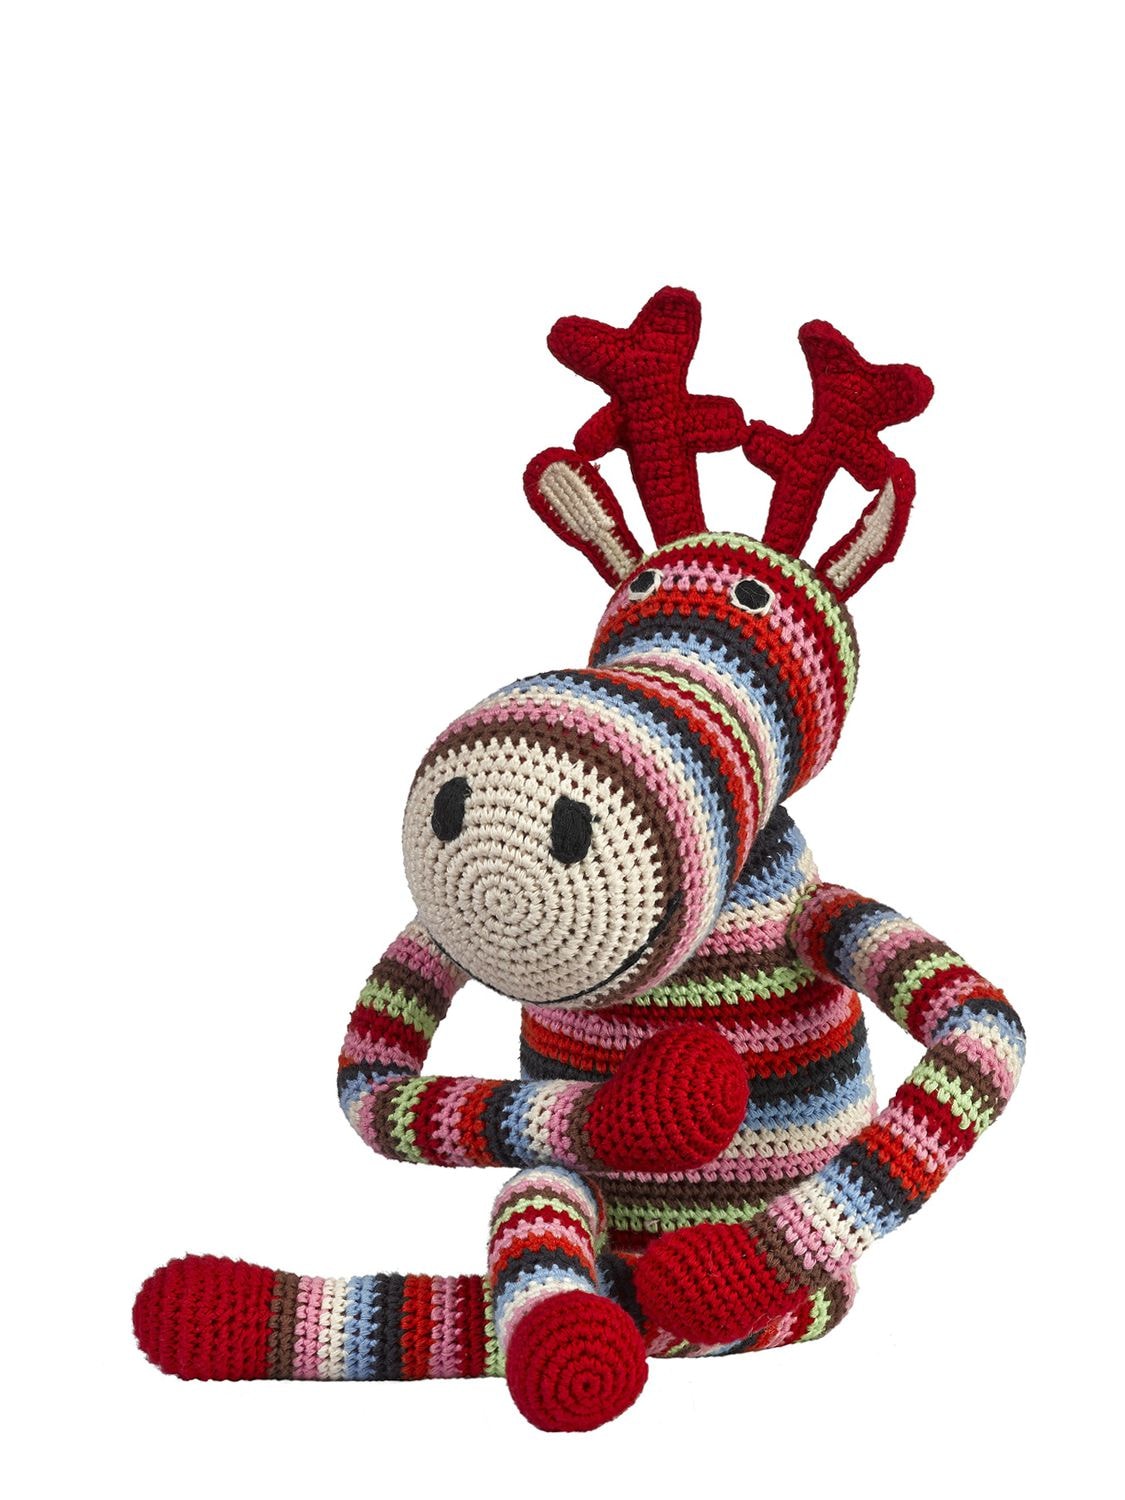 Anne-claire Petit Hand-crocheted Organic Cotton Reindeer In Multicolor